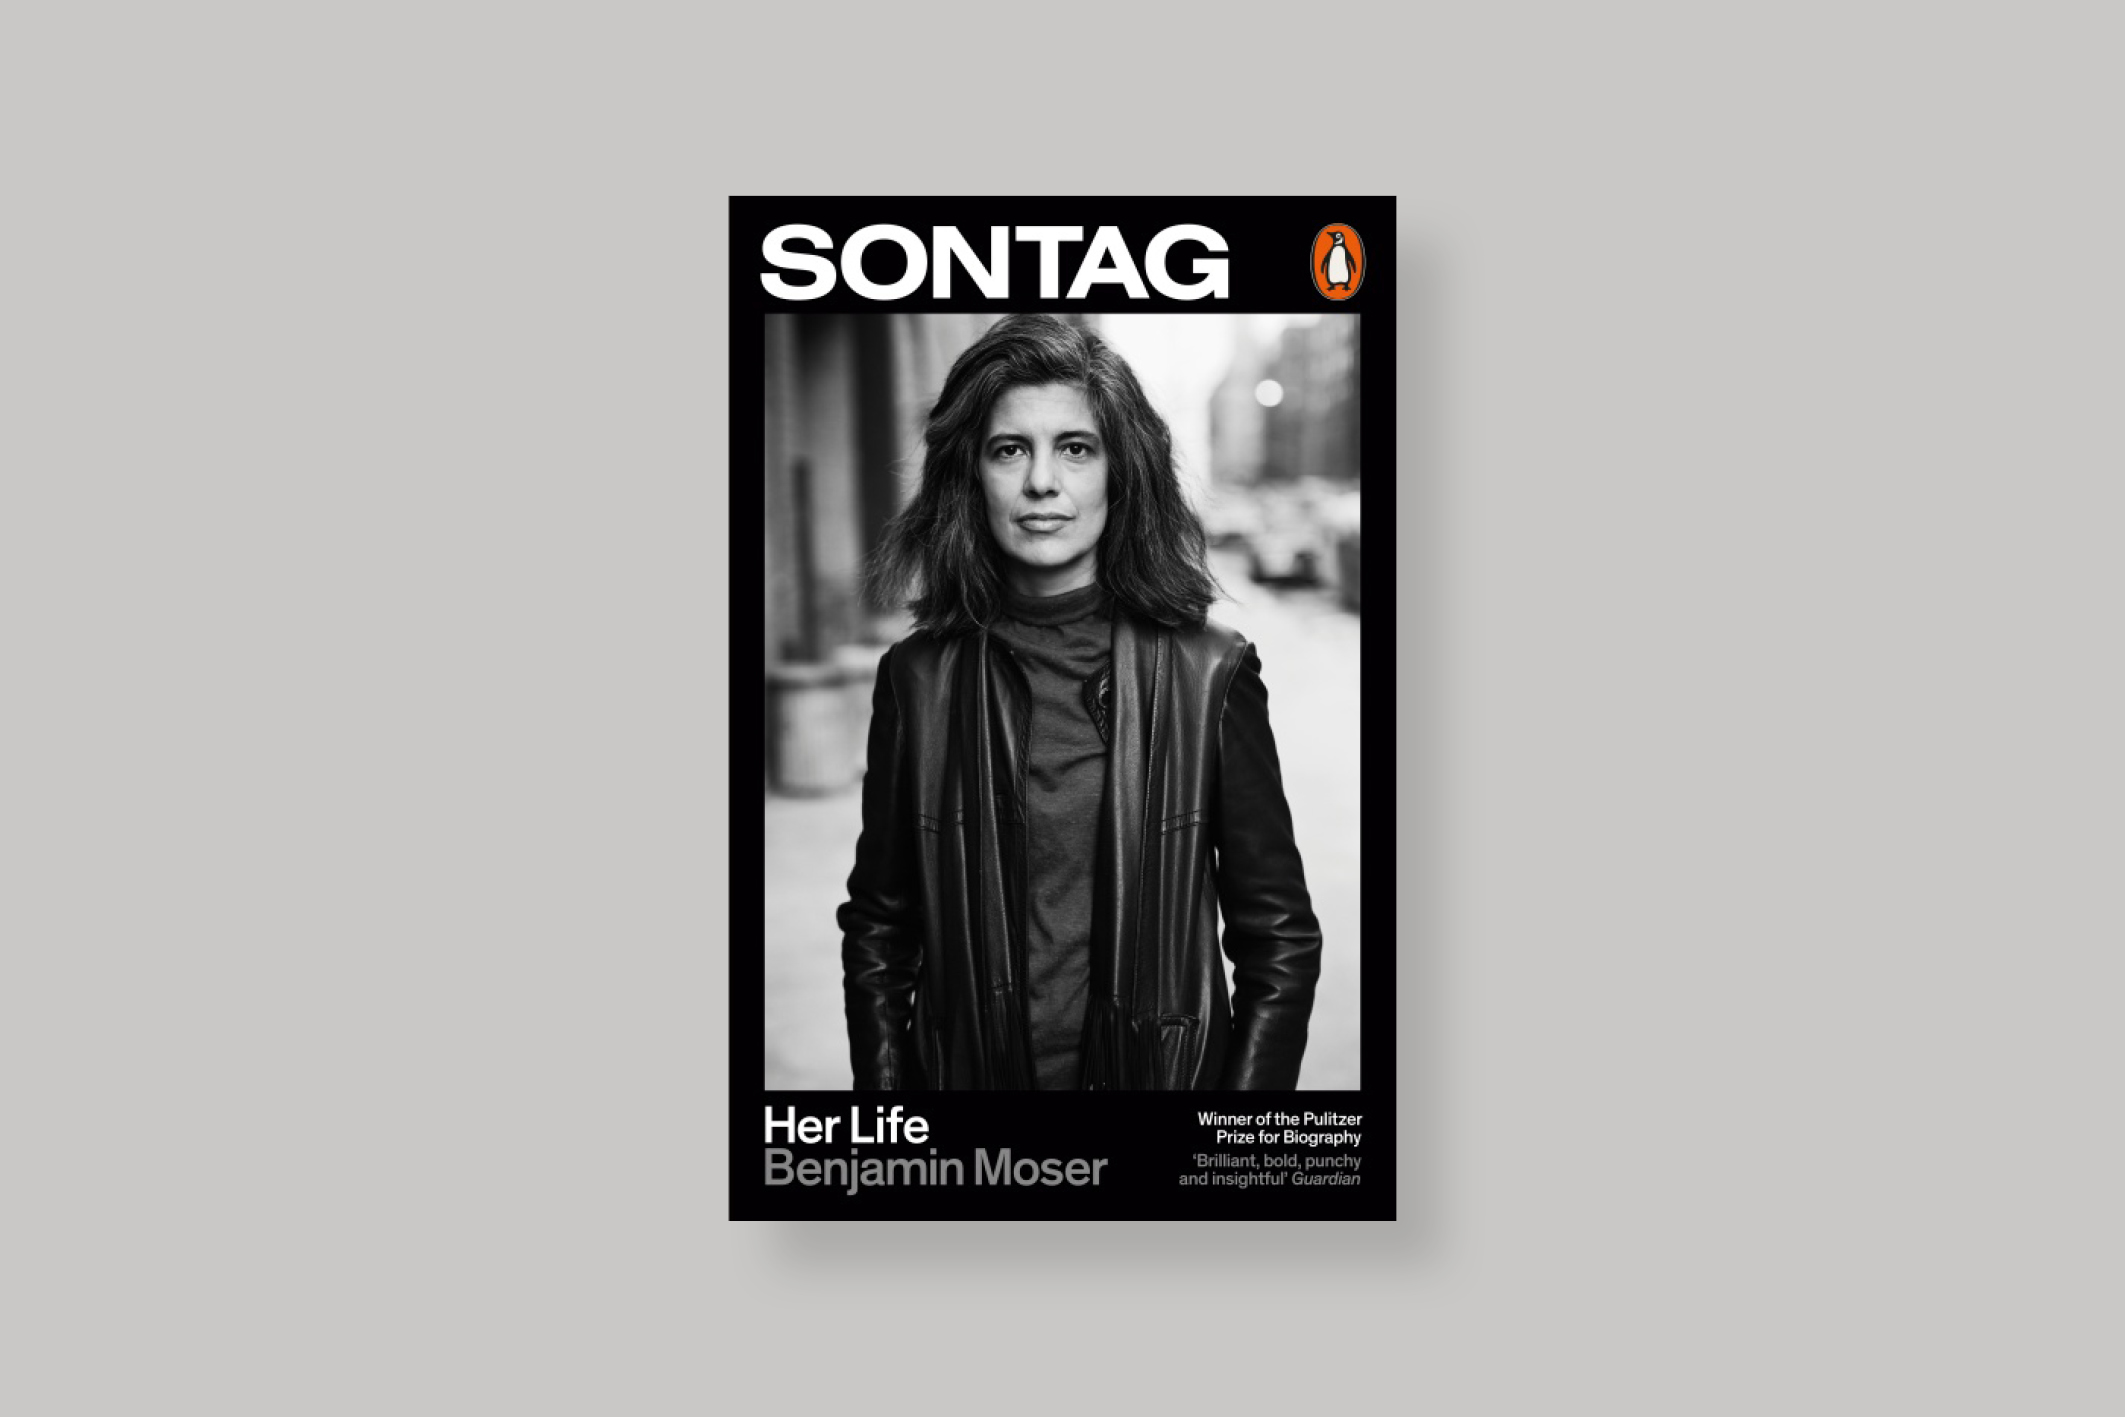 Sontag-her-life-be,jamin-moser-penguin-books-cover